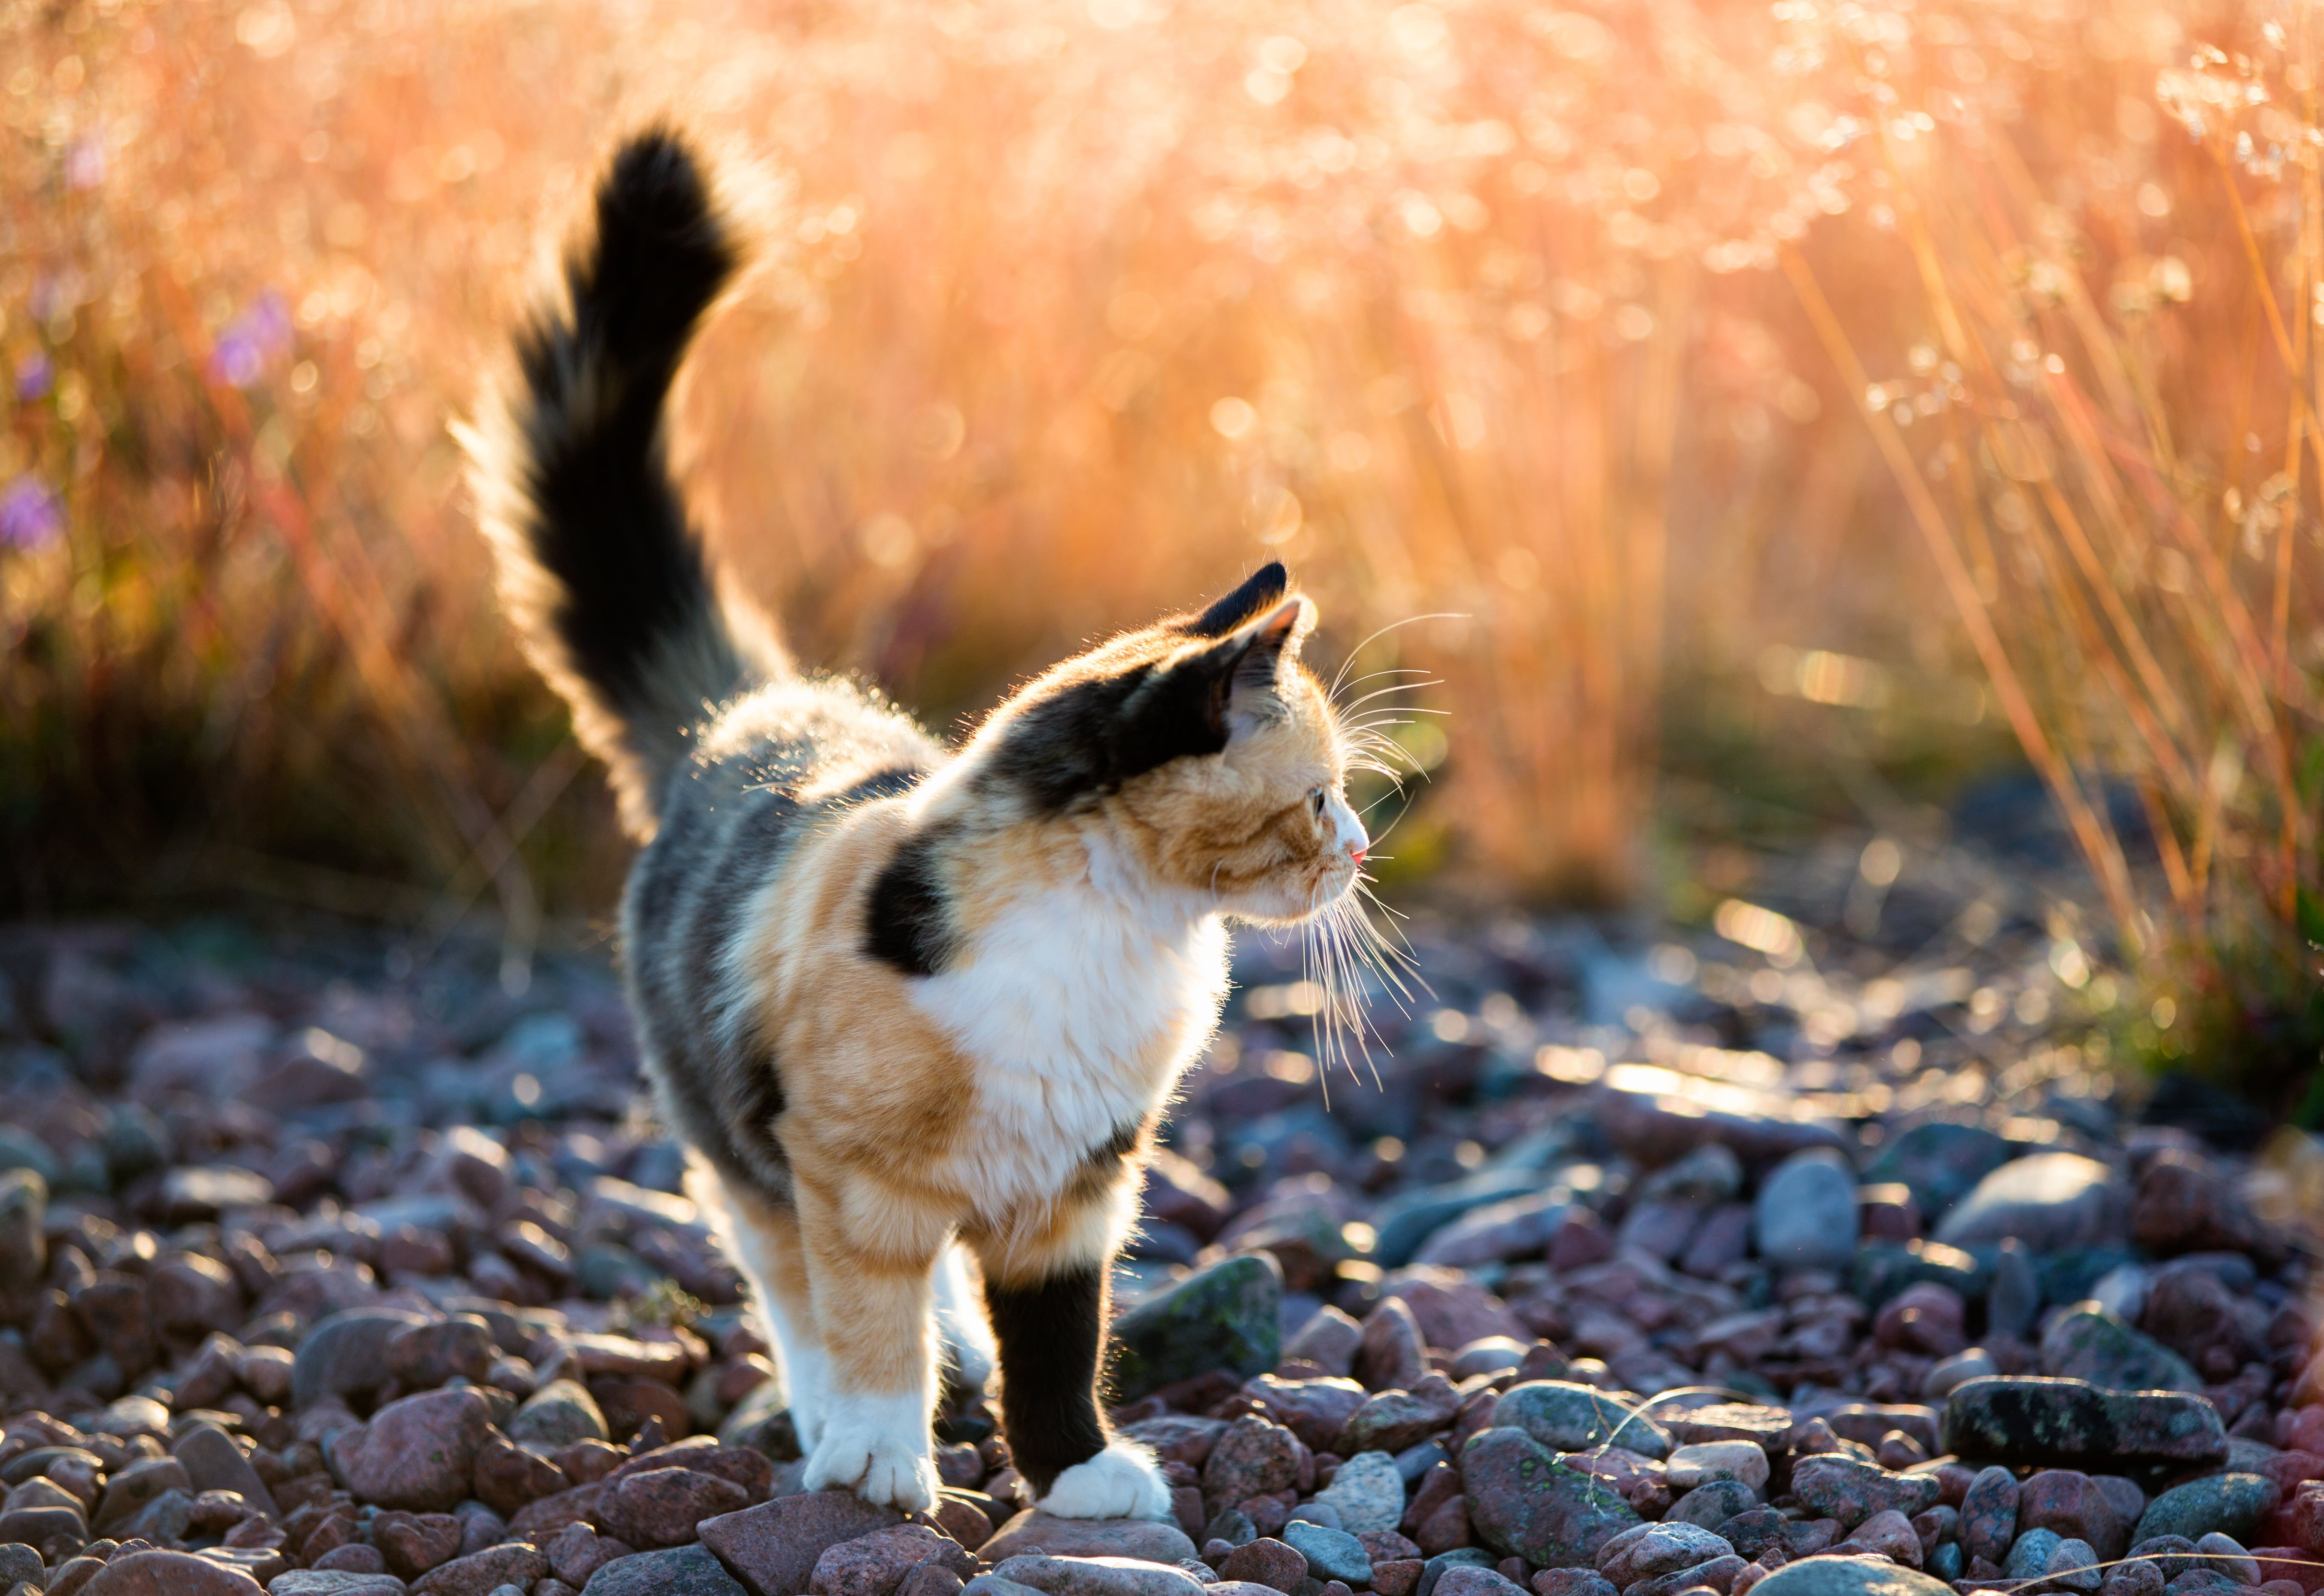 Calico Cat Walking On Gray Stone Field During Daytime Close Up Photo